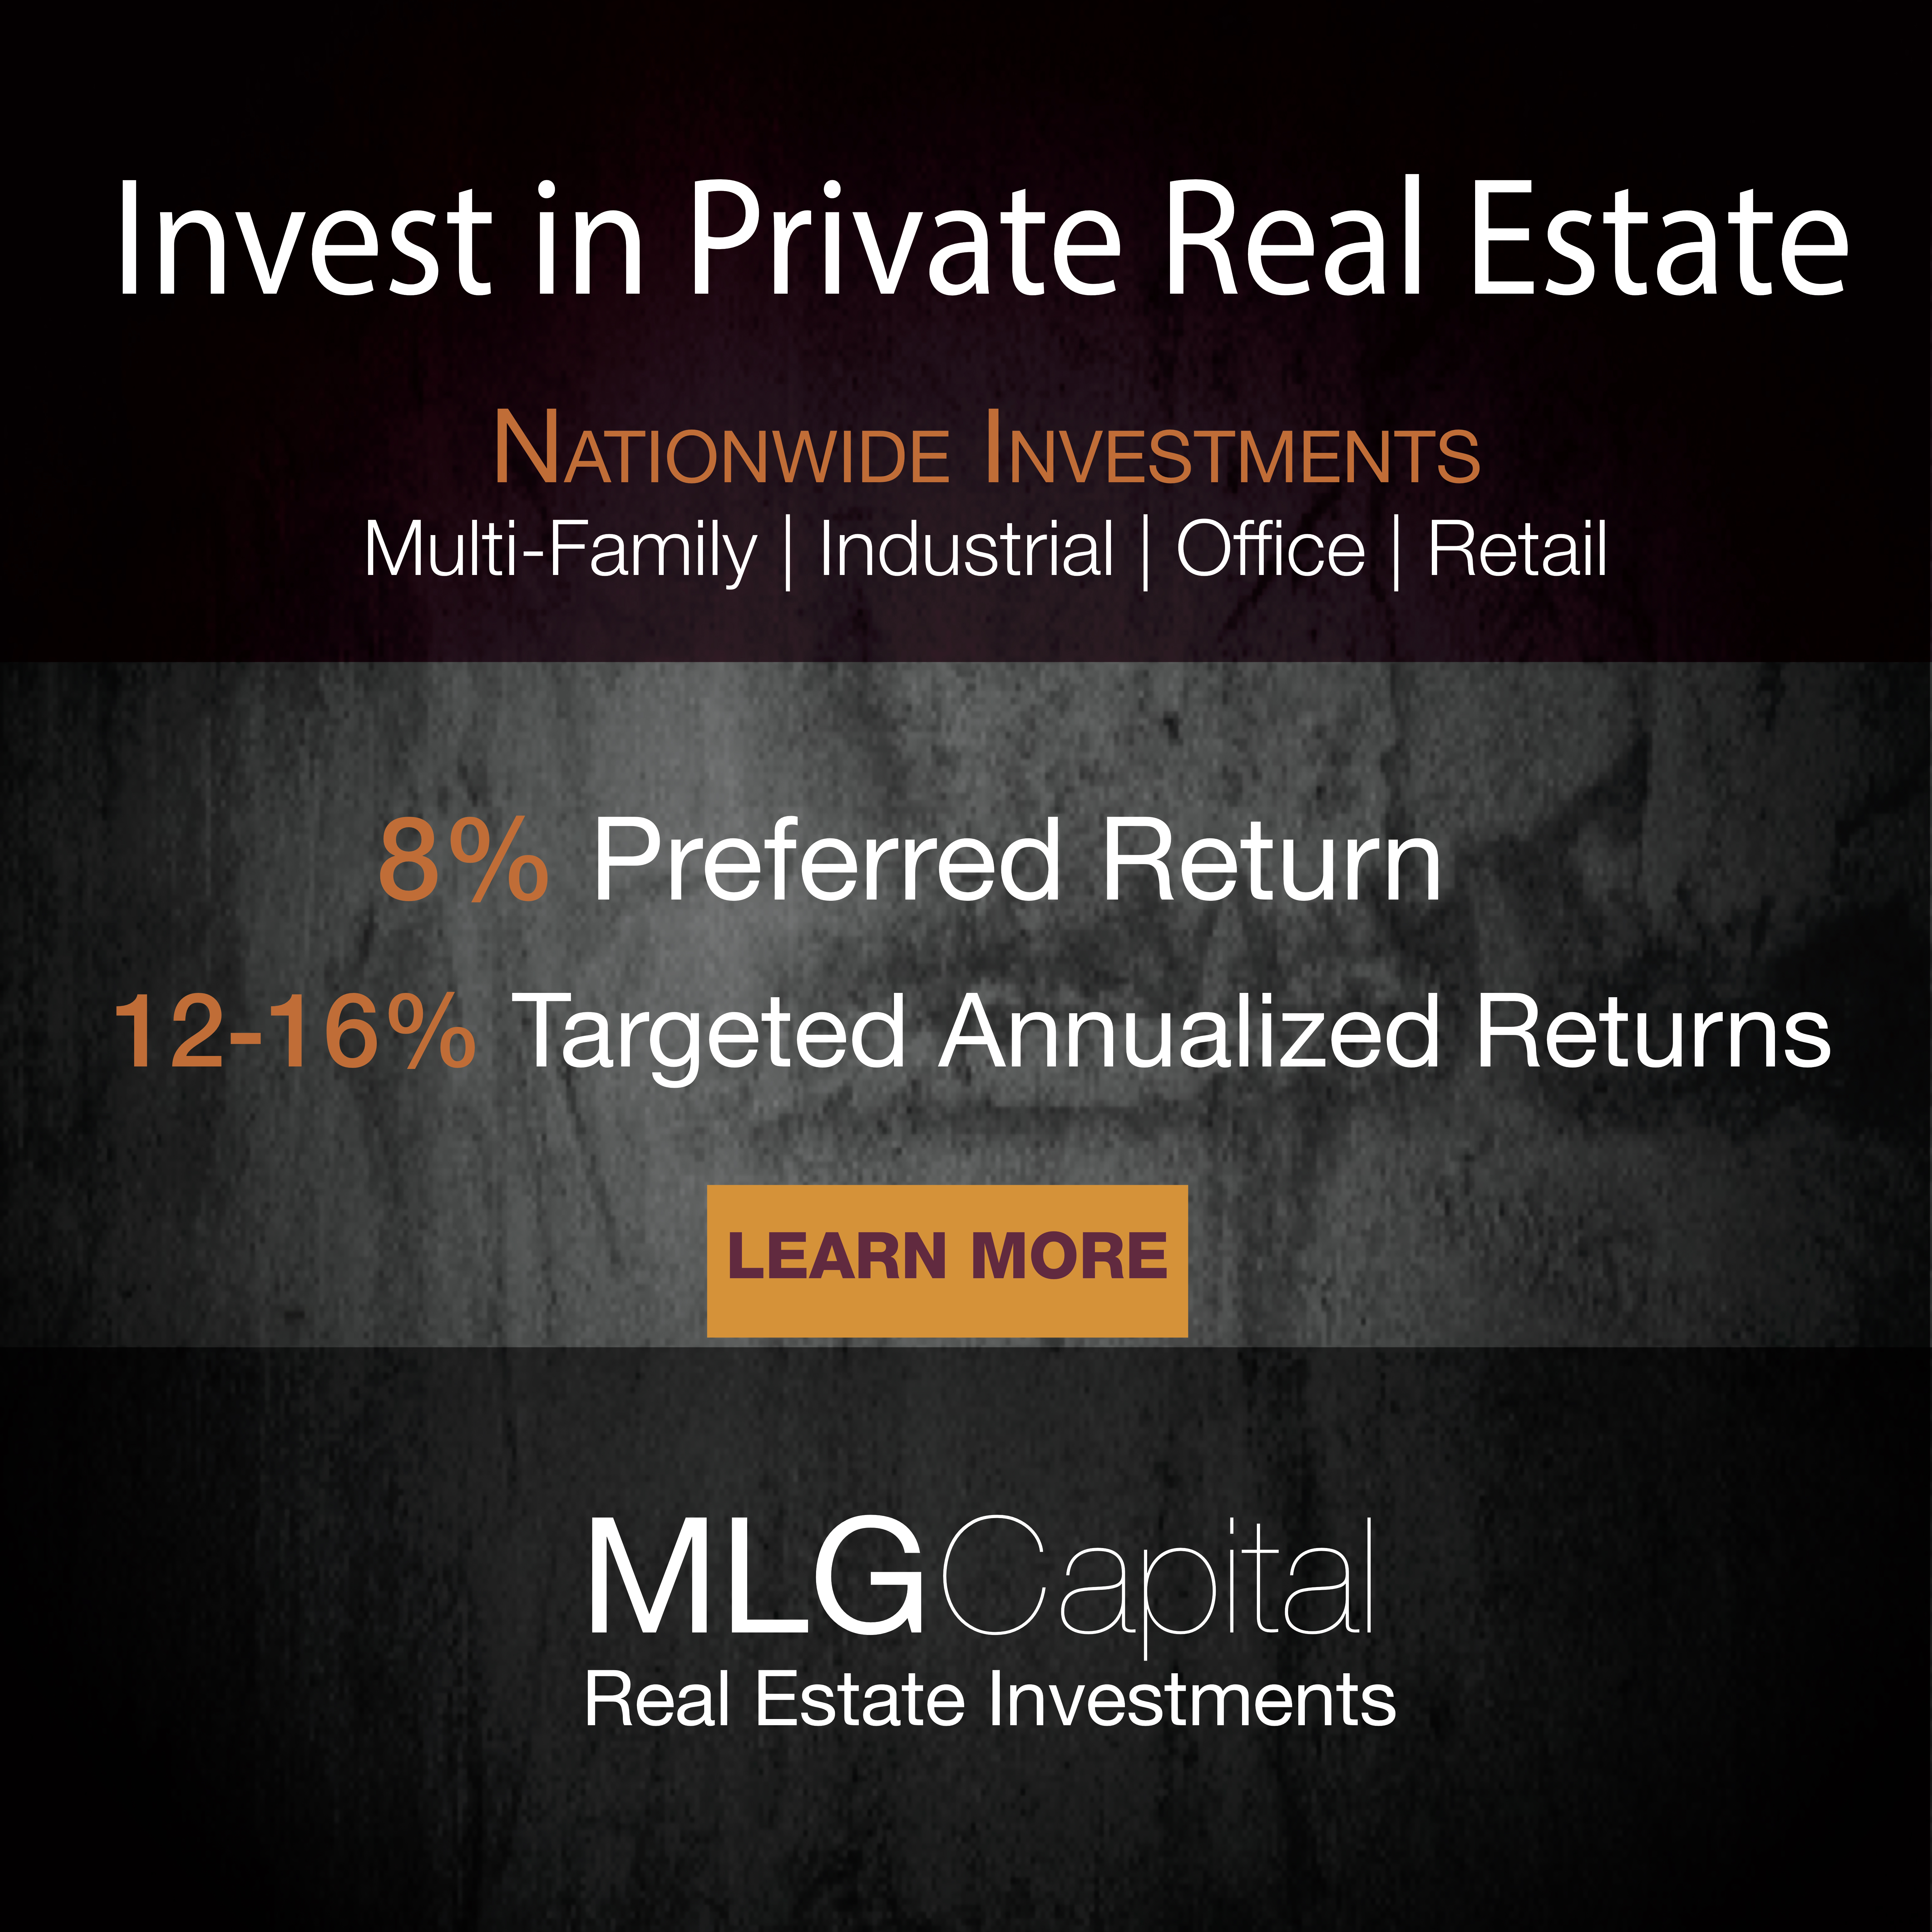 MLG capital invest in private real estate